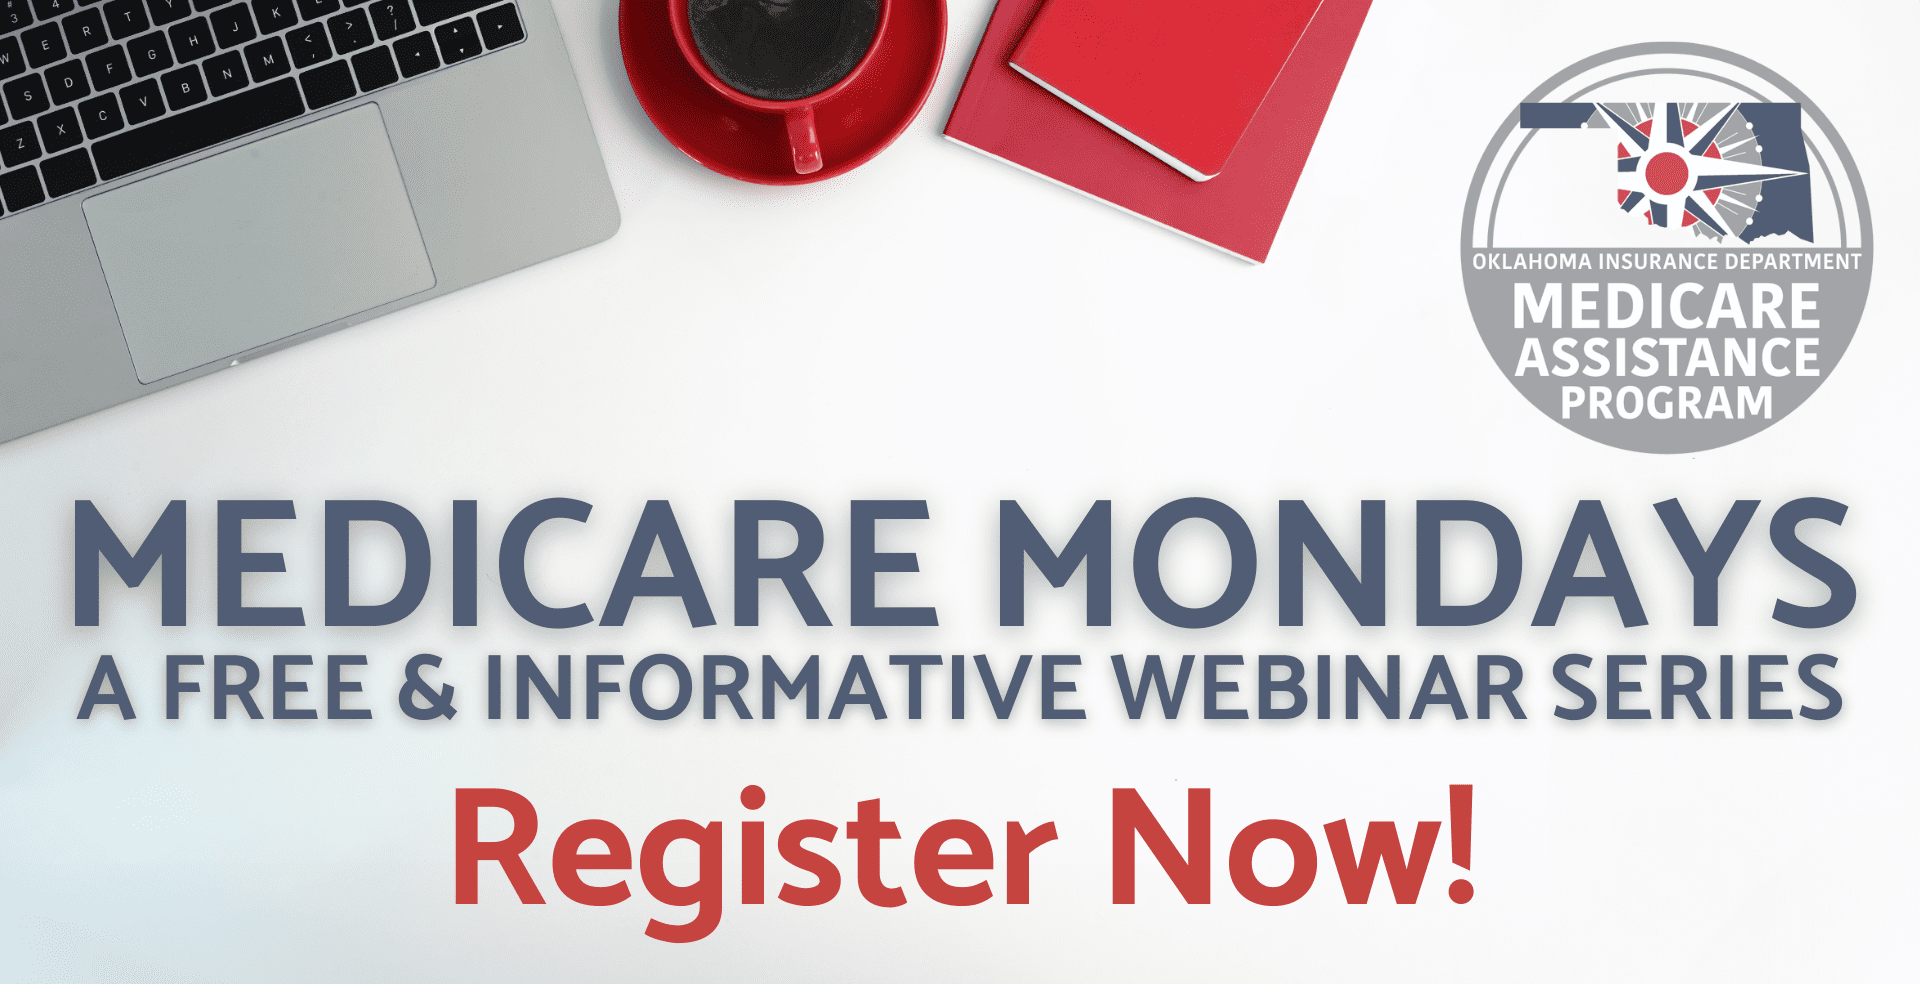 Click here to register for the next Medicare Monday Webinar